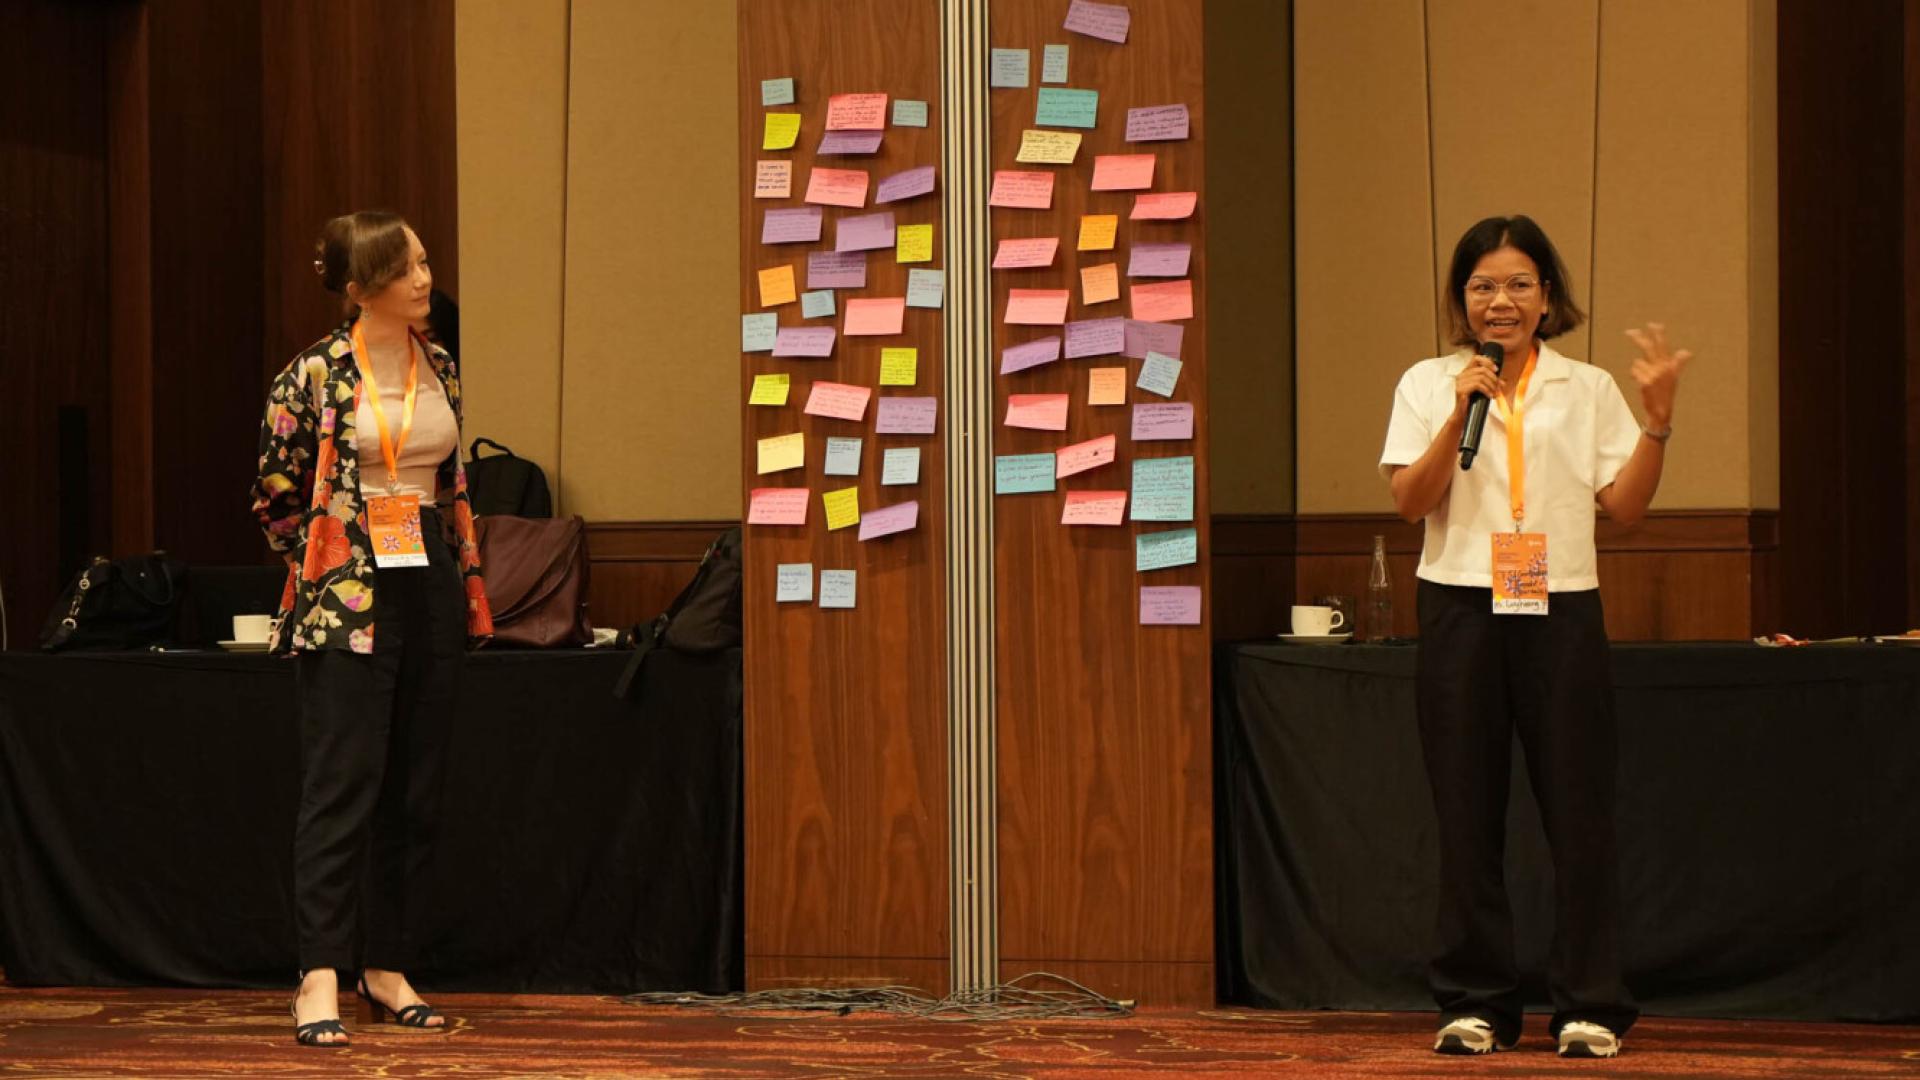 Two women stand either side of a wall of post-it notes, one is speaking into a microphone